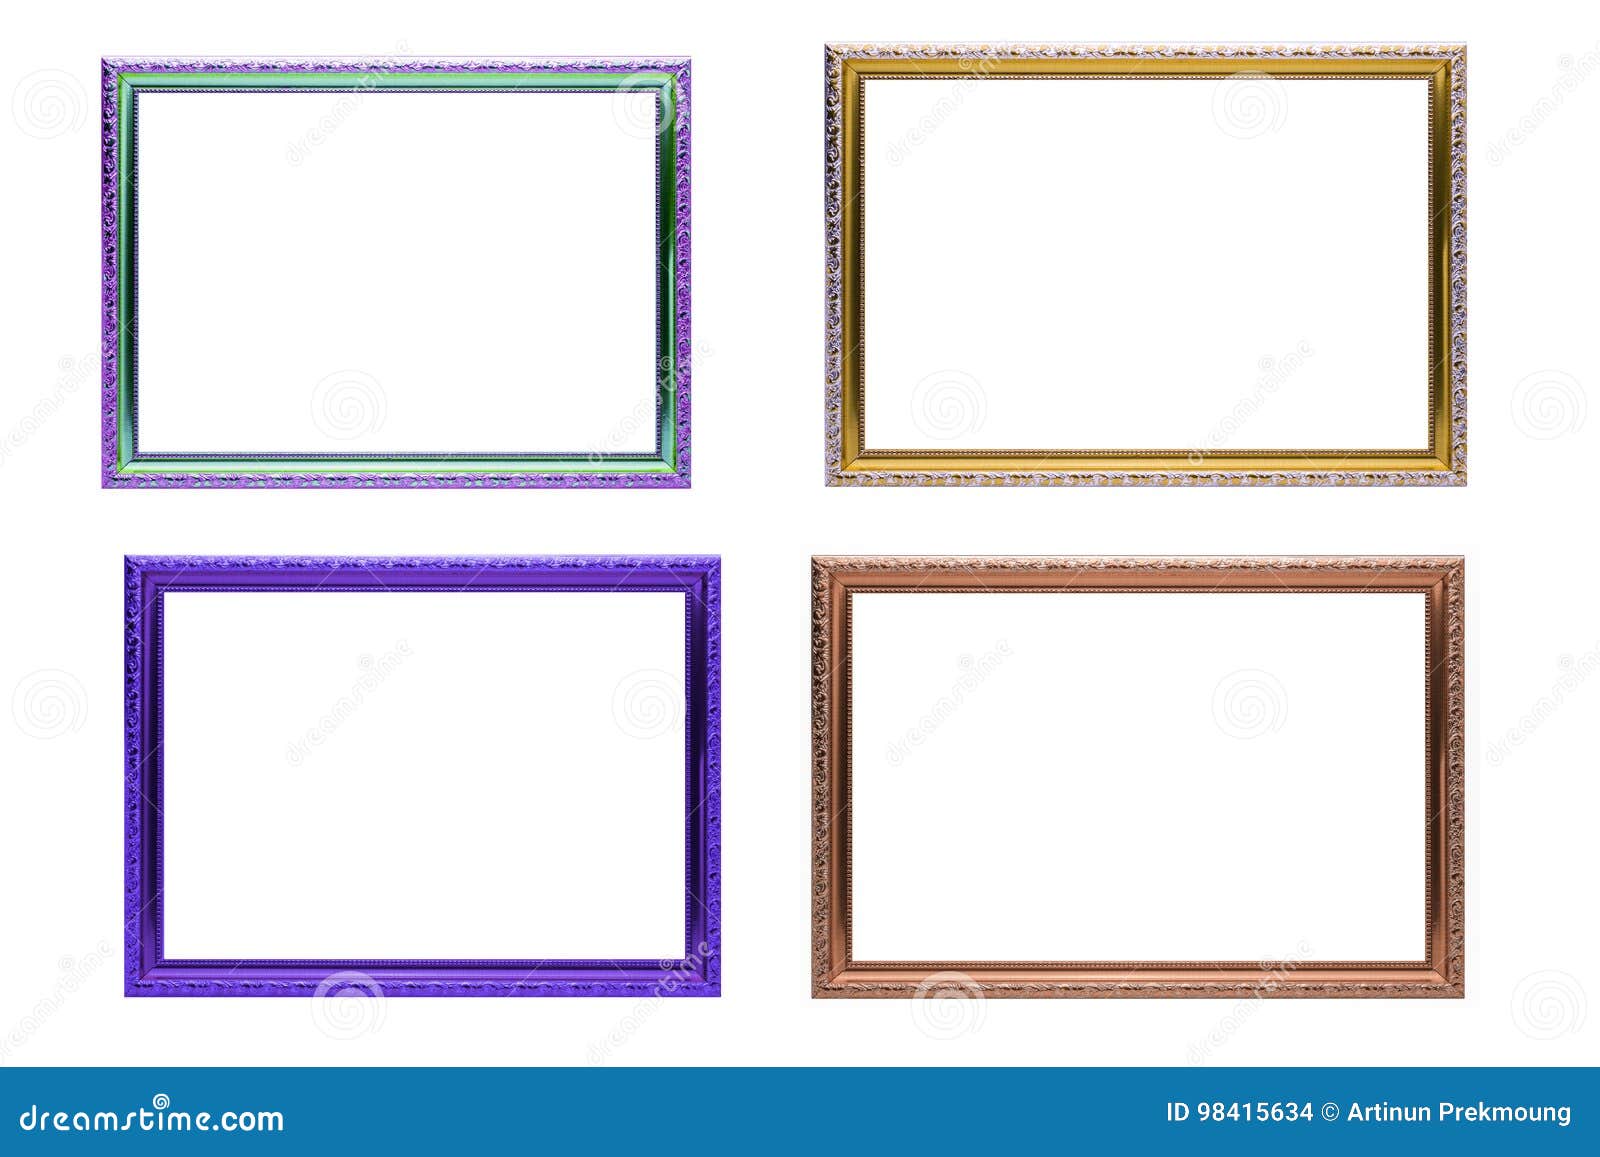 Set Of Colorful Frames Vintage Style Isolated Stock Photo - Image of